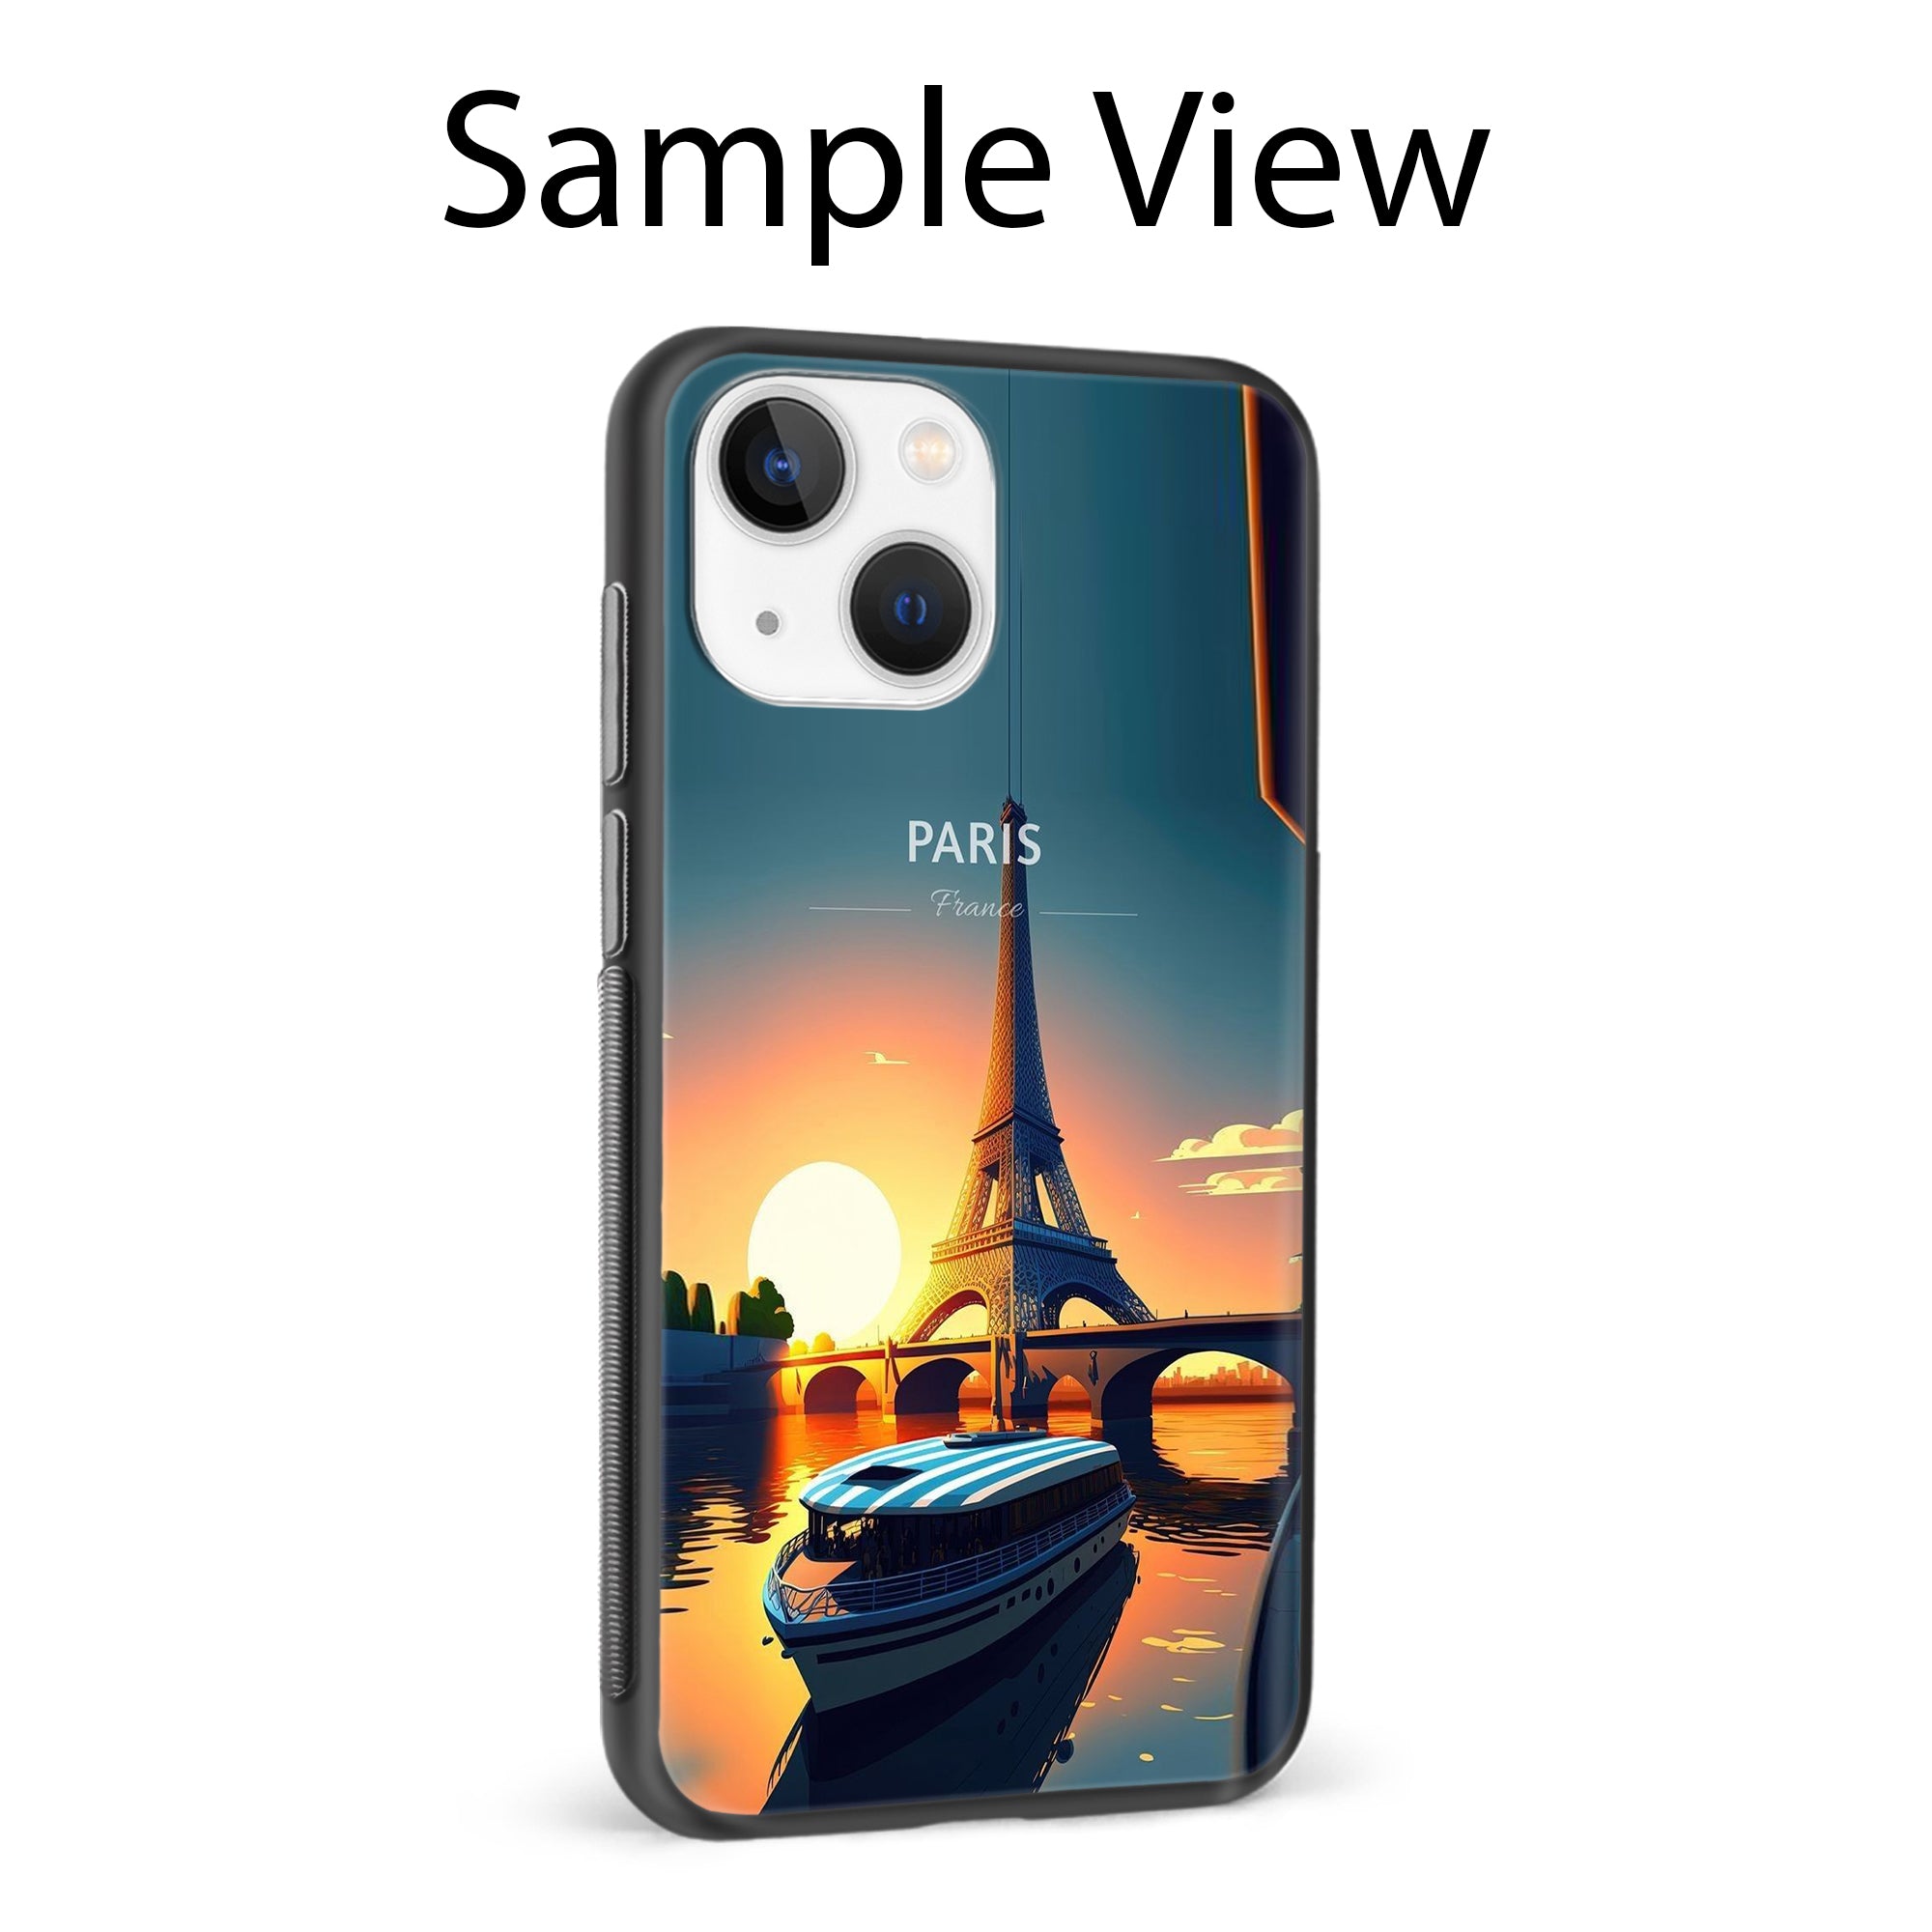 Buy France Metal-Silicon Back Mobile Phone Case/Cover For Samsung Galaxy A72 Online